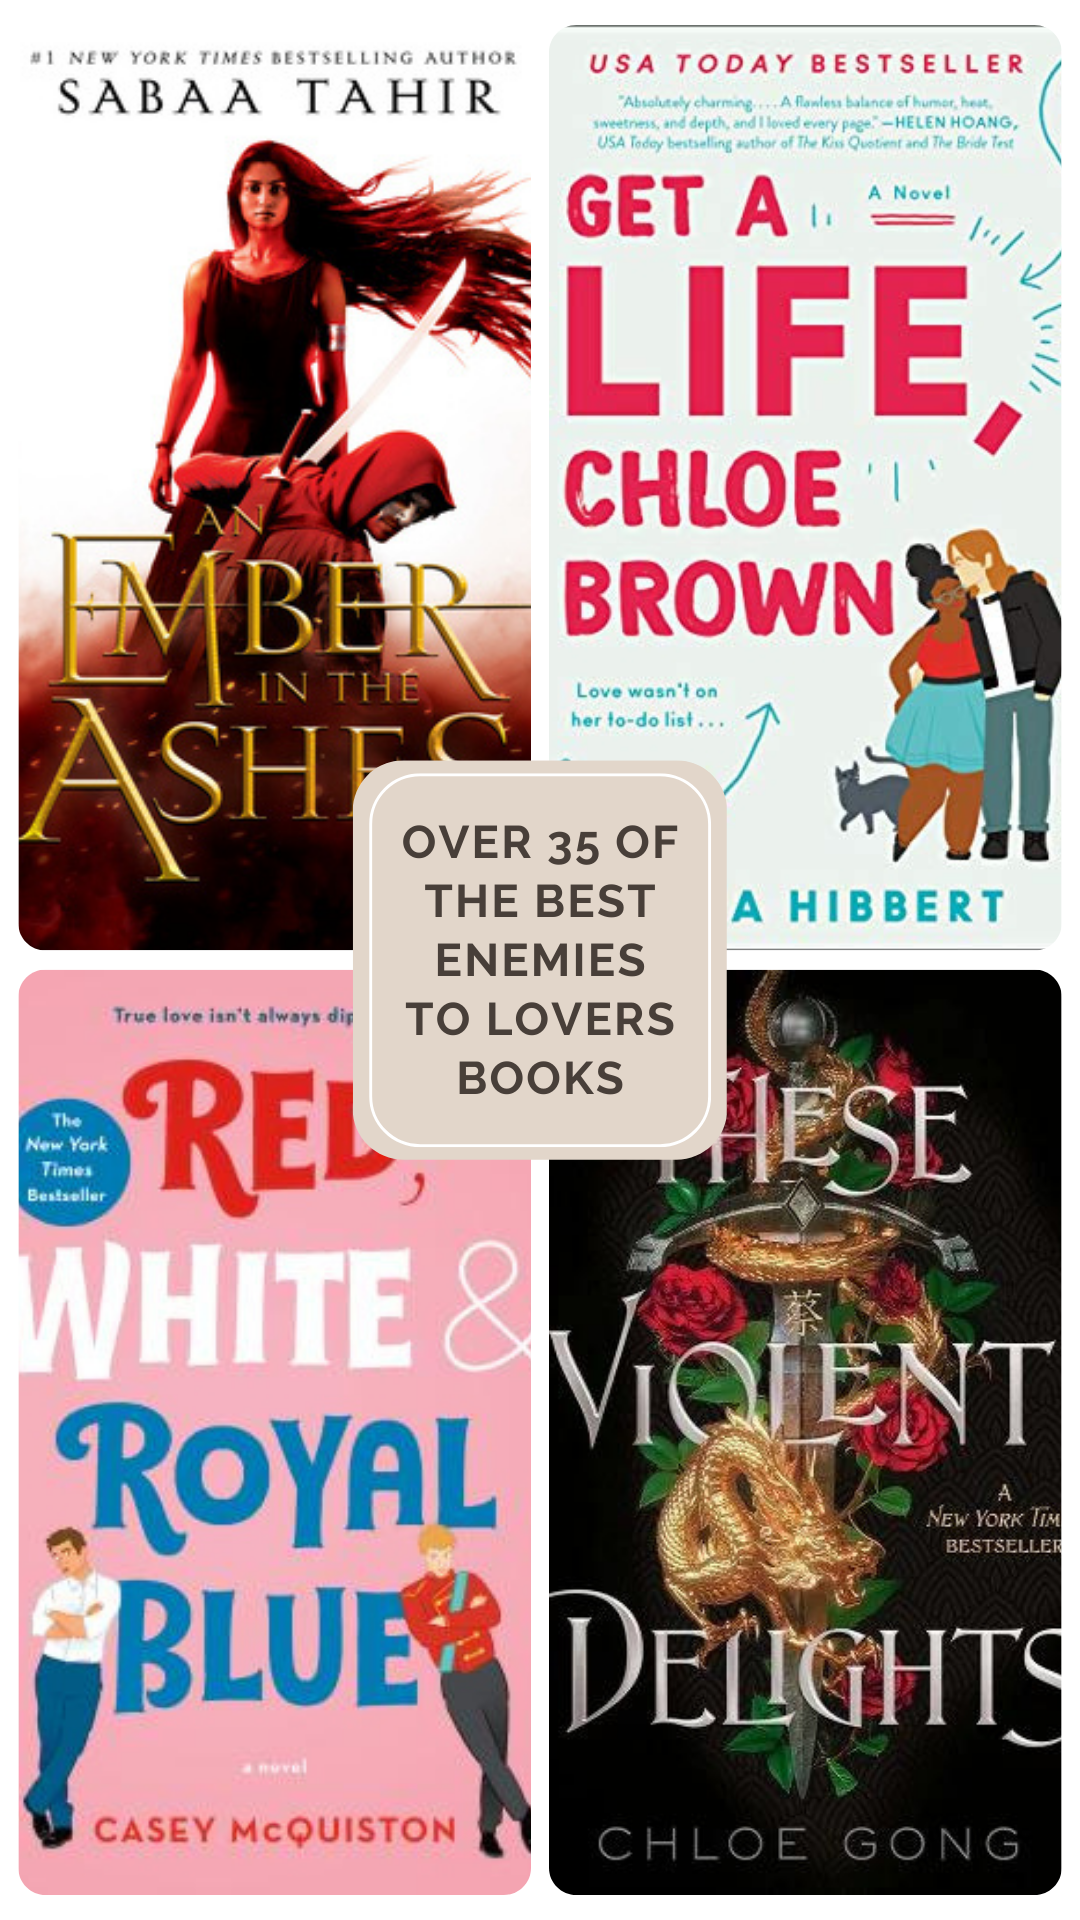 Over 35 of the Best Enemies to Lovers Books